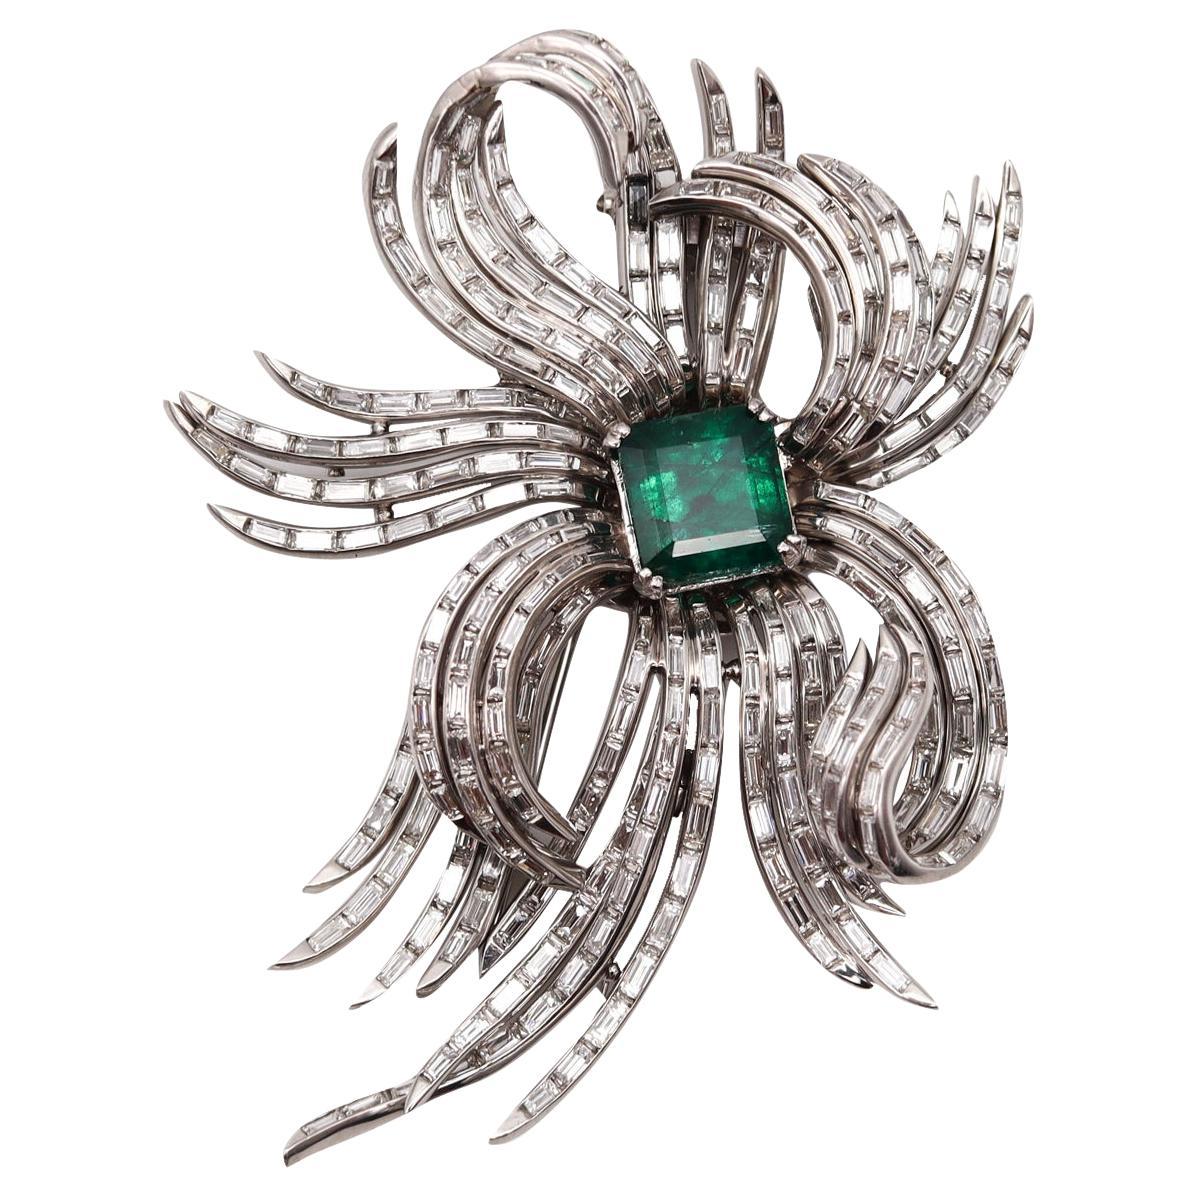 Art Deco 1935 Fabulous Brooch In Platinum With 17.72 Ctw In Diamonds And Emerald For Sale